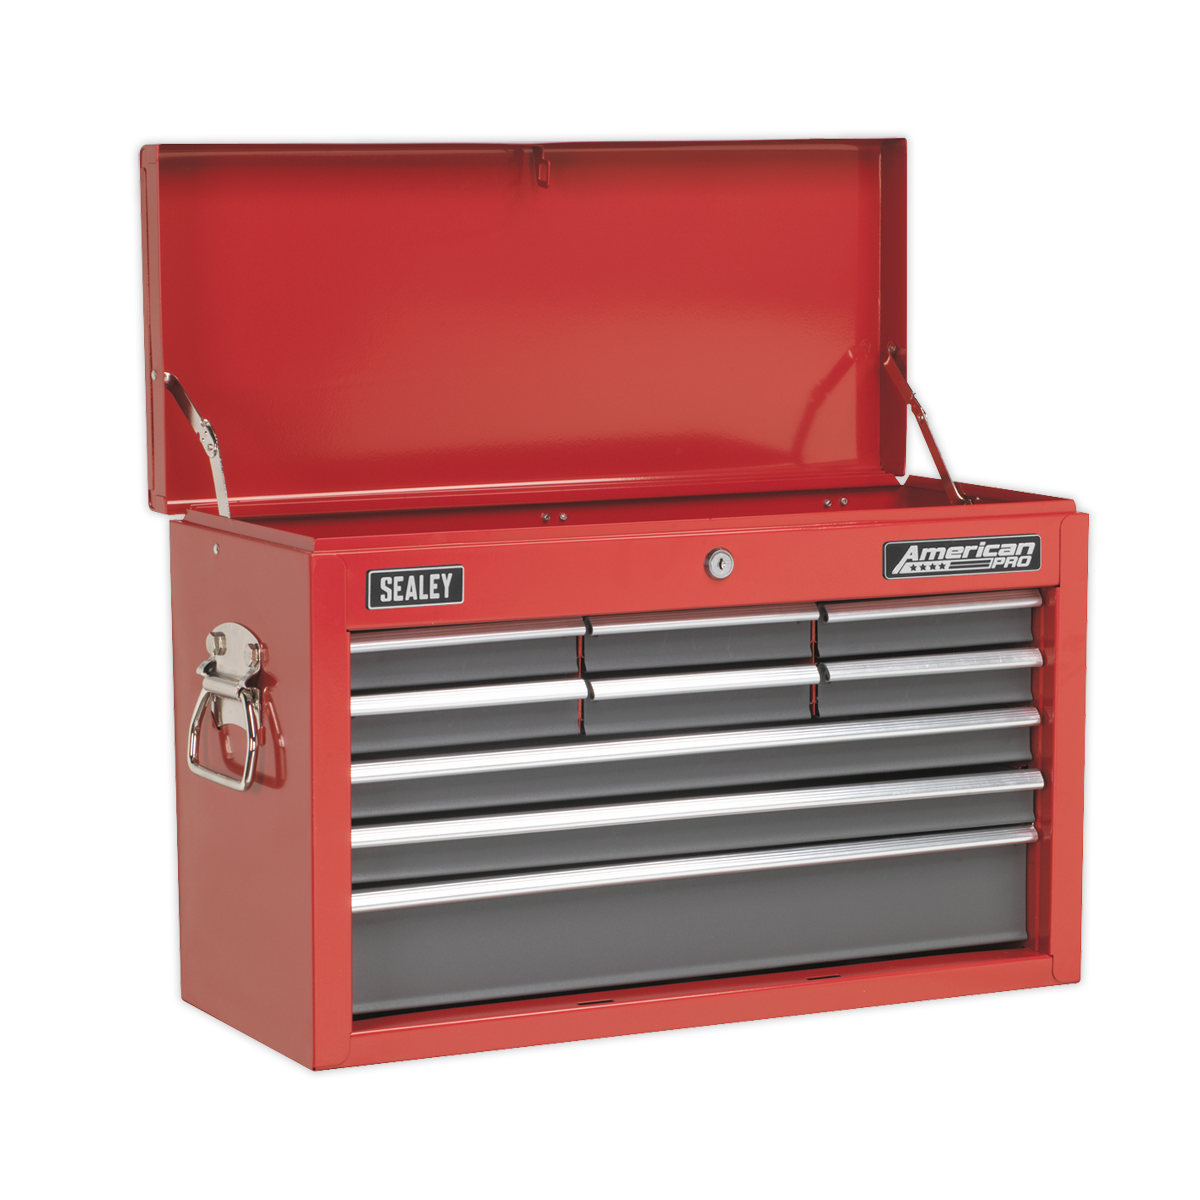 Topchest 9 Drawer with Ball-Bearing Slides - Red/Grey - AP22509BB - Farming Parts